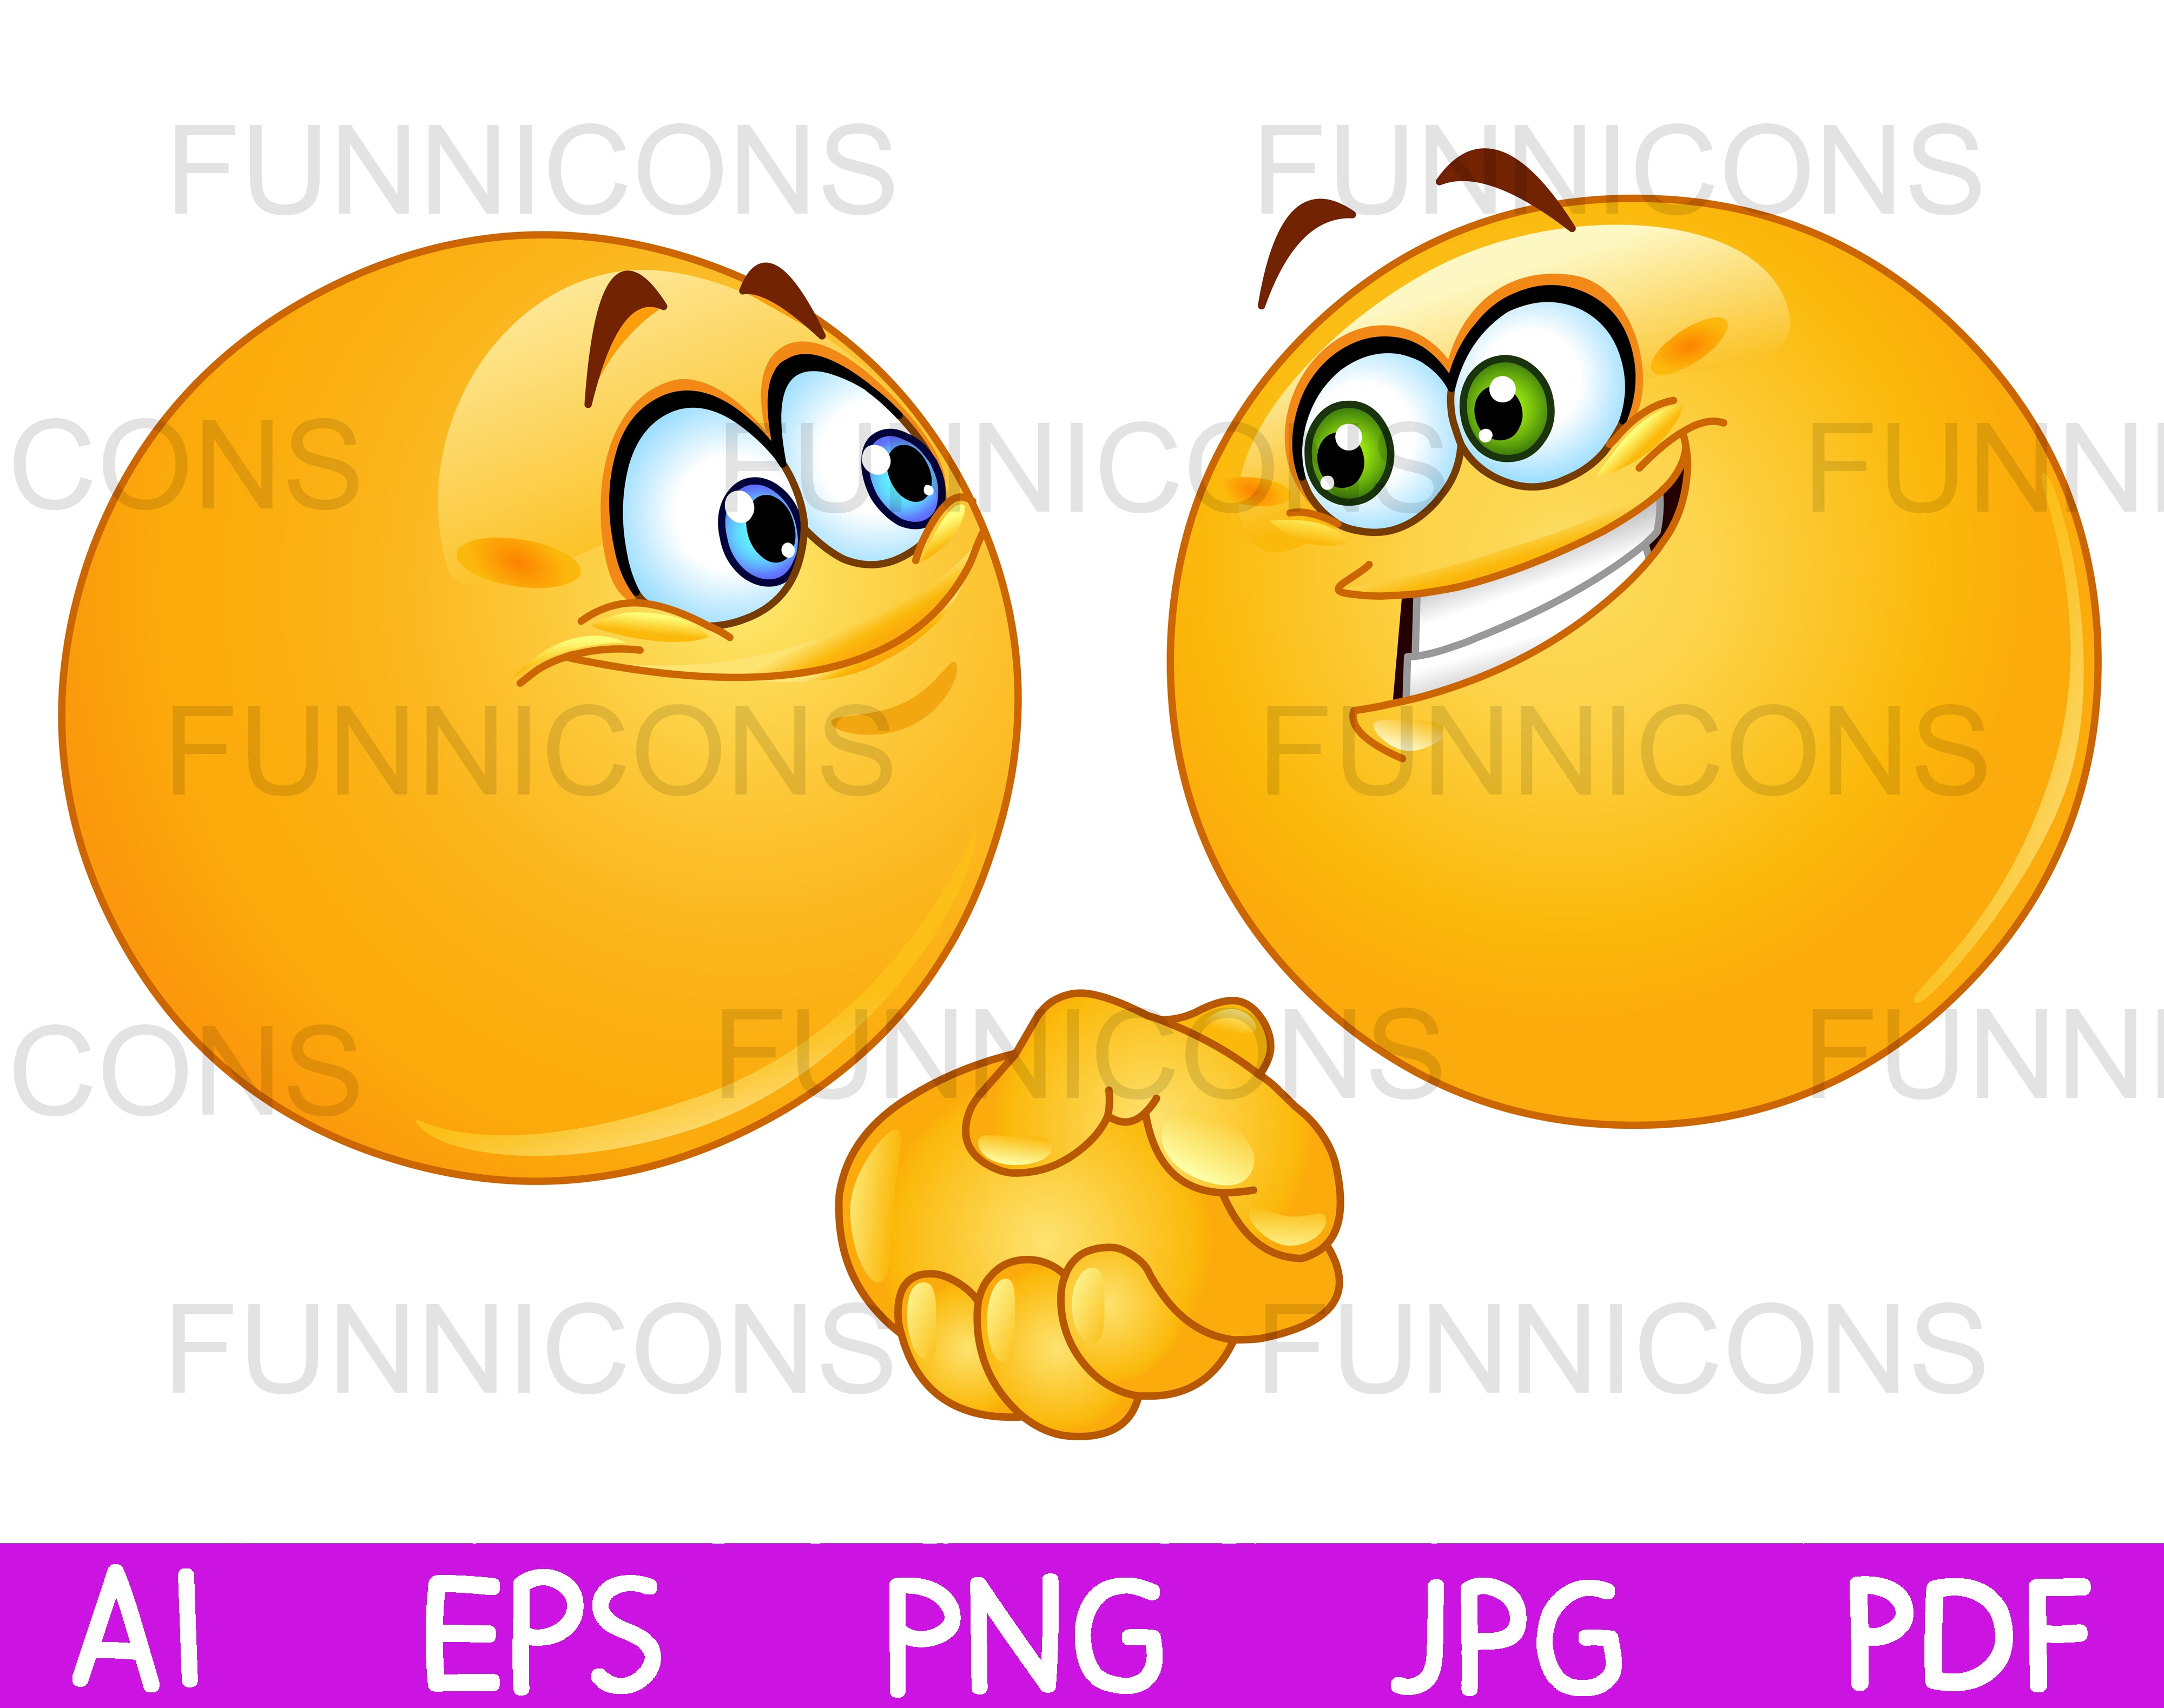 Best Uses for the Handshake Emoji in Online Interactions - Smileys,  Emoticons And Emojis